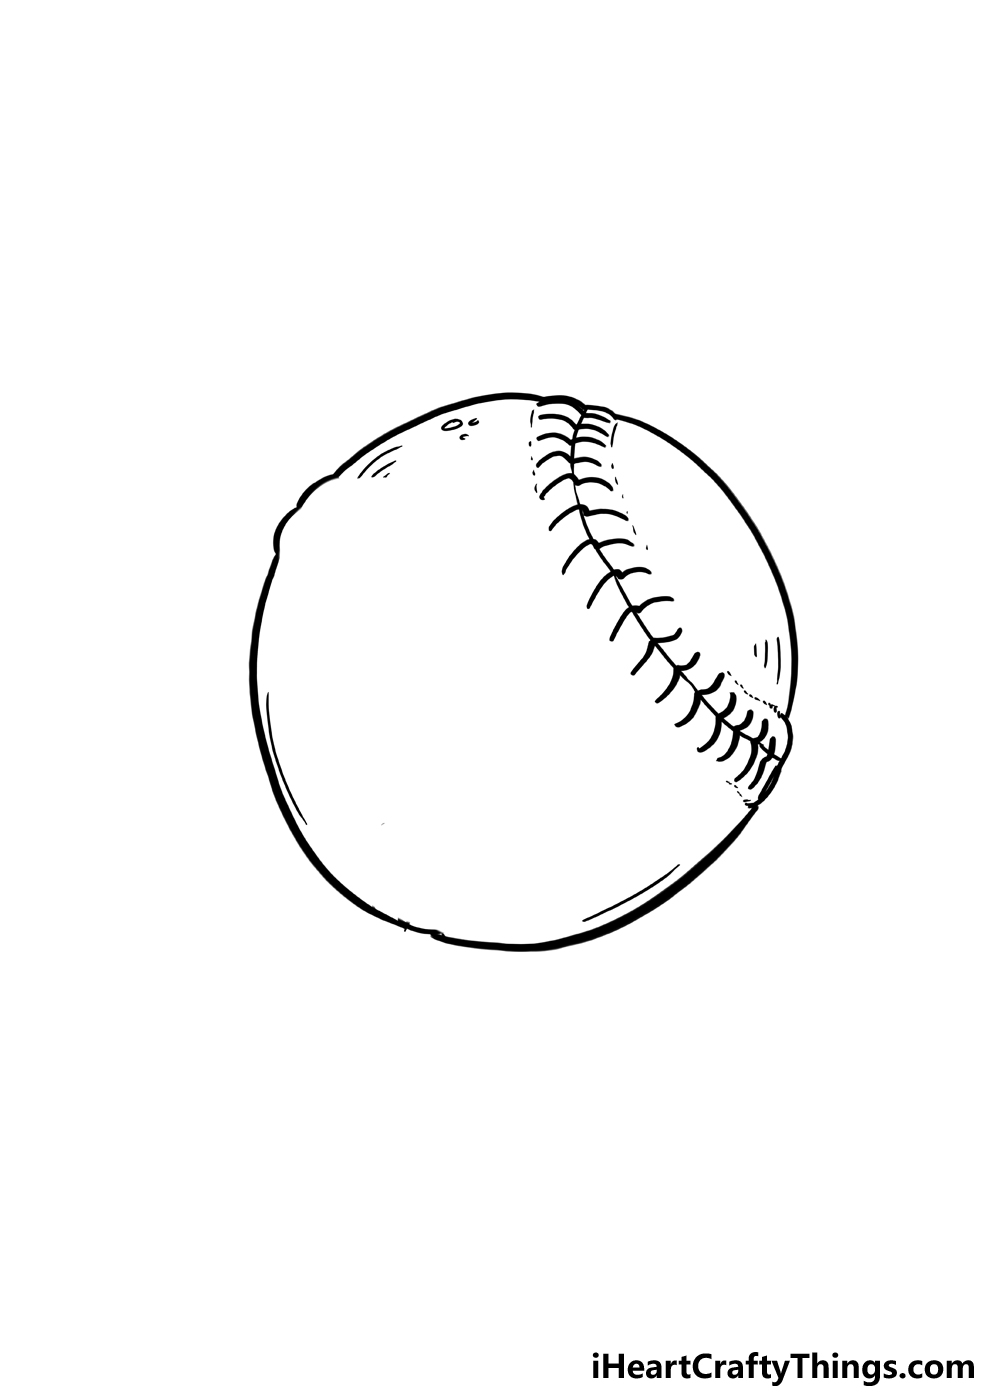 How to Draw A Softball step 4